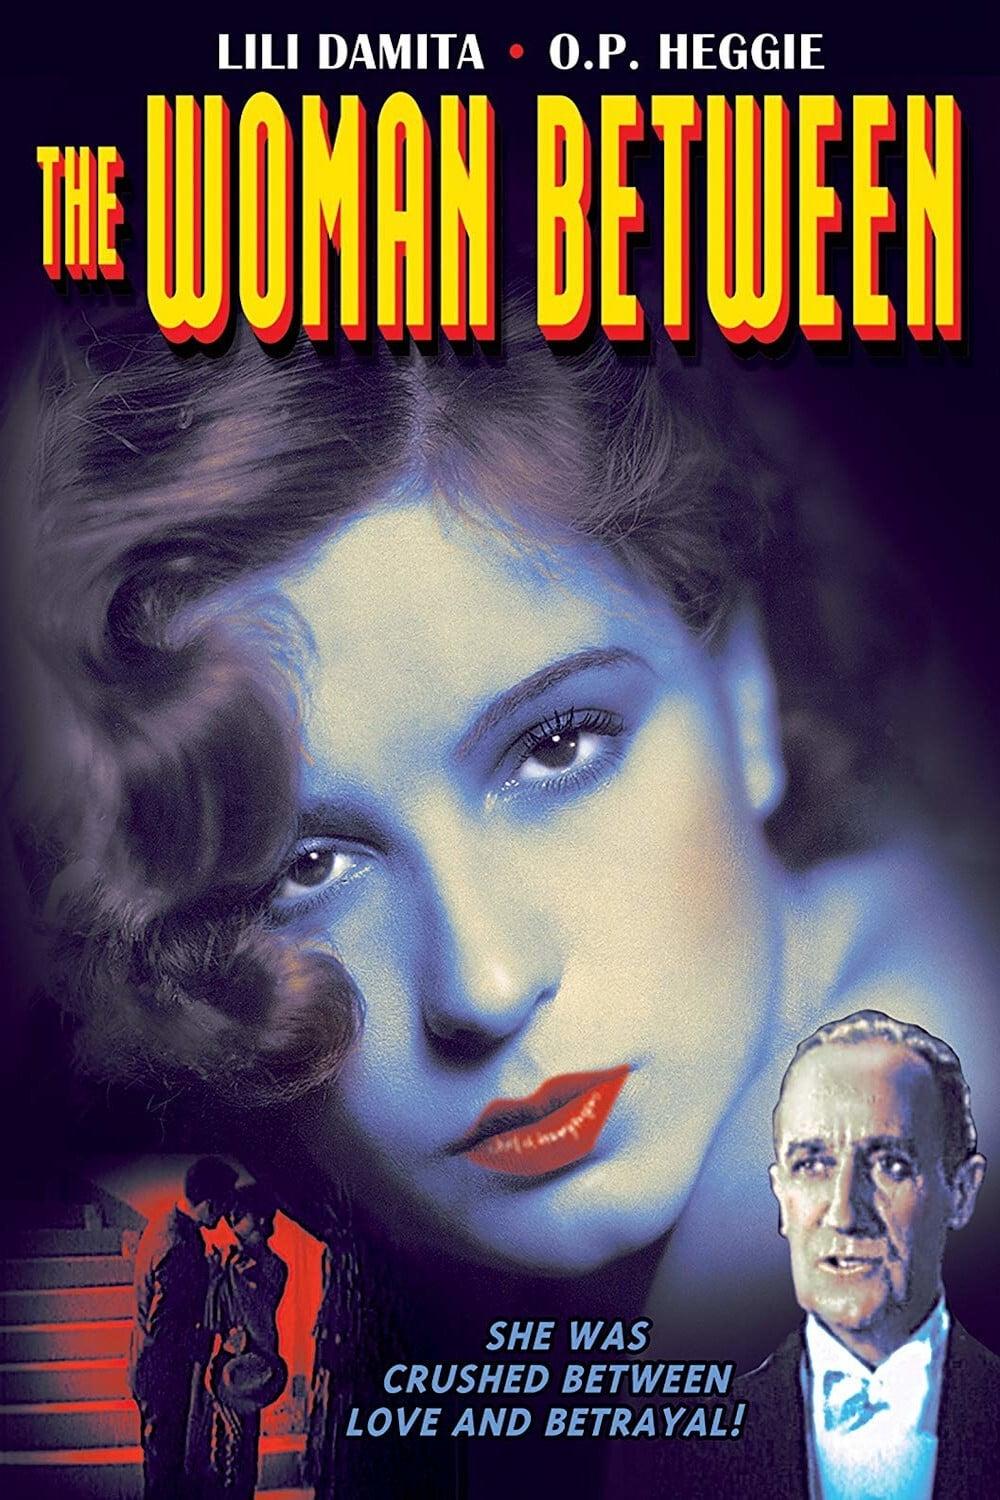 The Woman Between poster